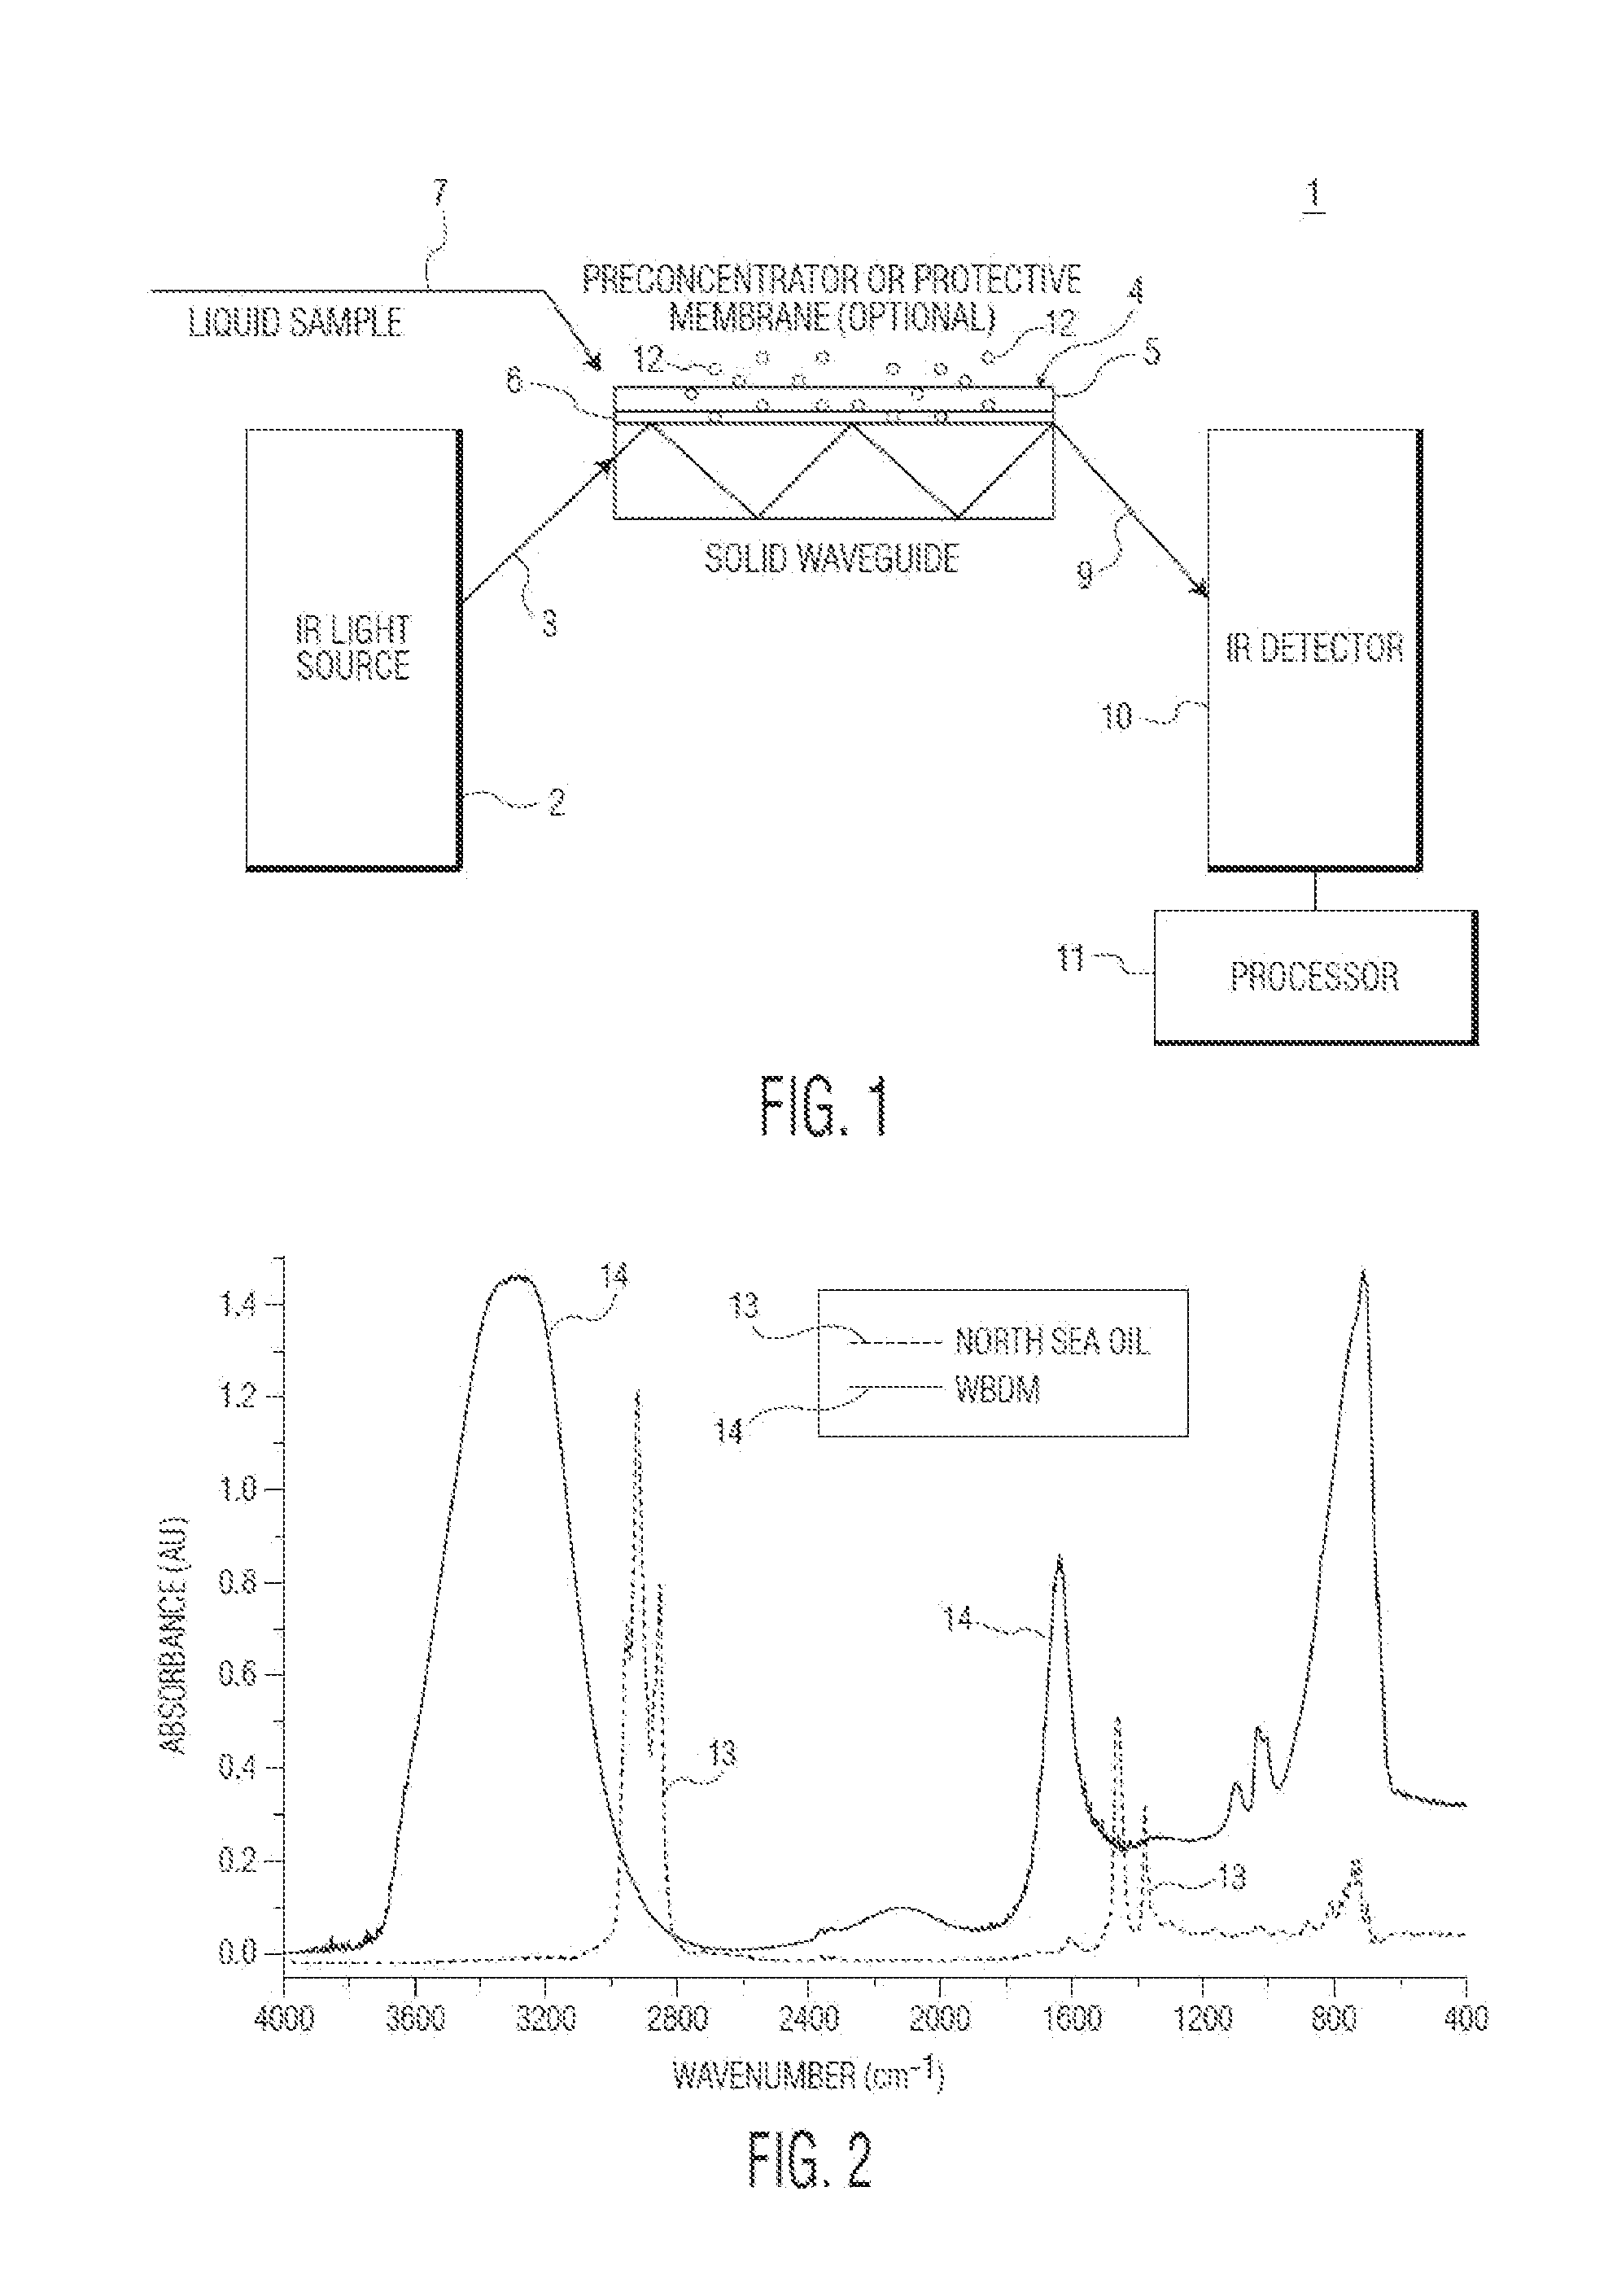 Method and Apparatus for a Mid-Infrared (MIR) System for Real Time Detection of Petroleum in Colloidal Suspensions of Sediments and Drilling Muds During Drilling Operations, Logging and Production Operations